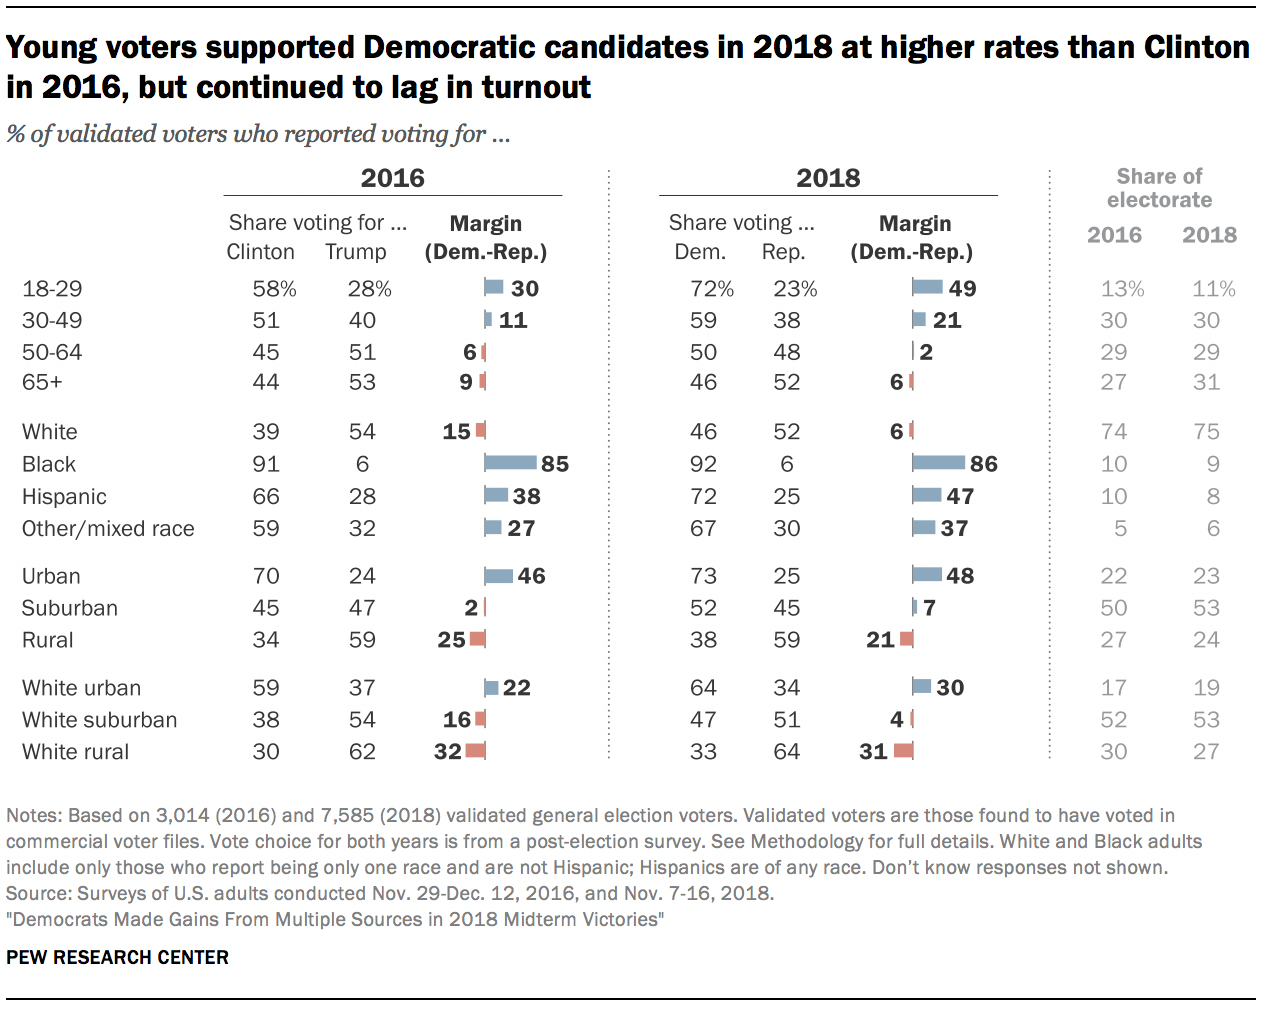 Young voters supported Democratic candidates in 2018 at higher rates than Clinton in 2016, but continued to lag in turnout